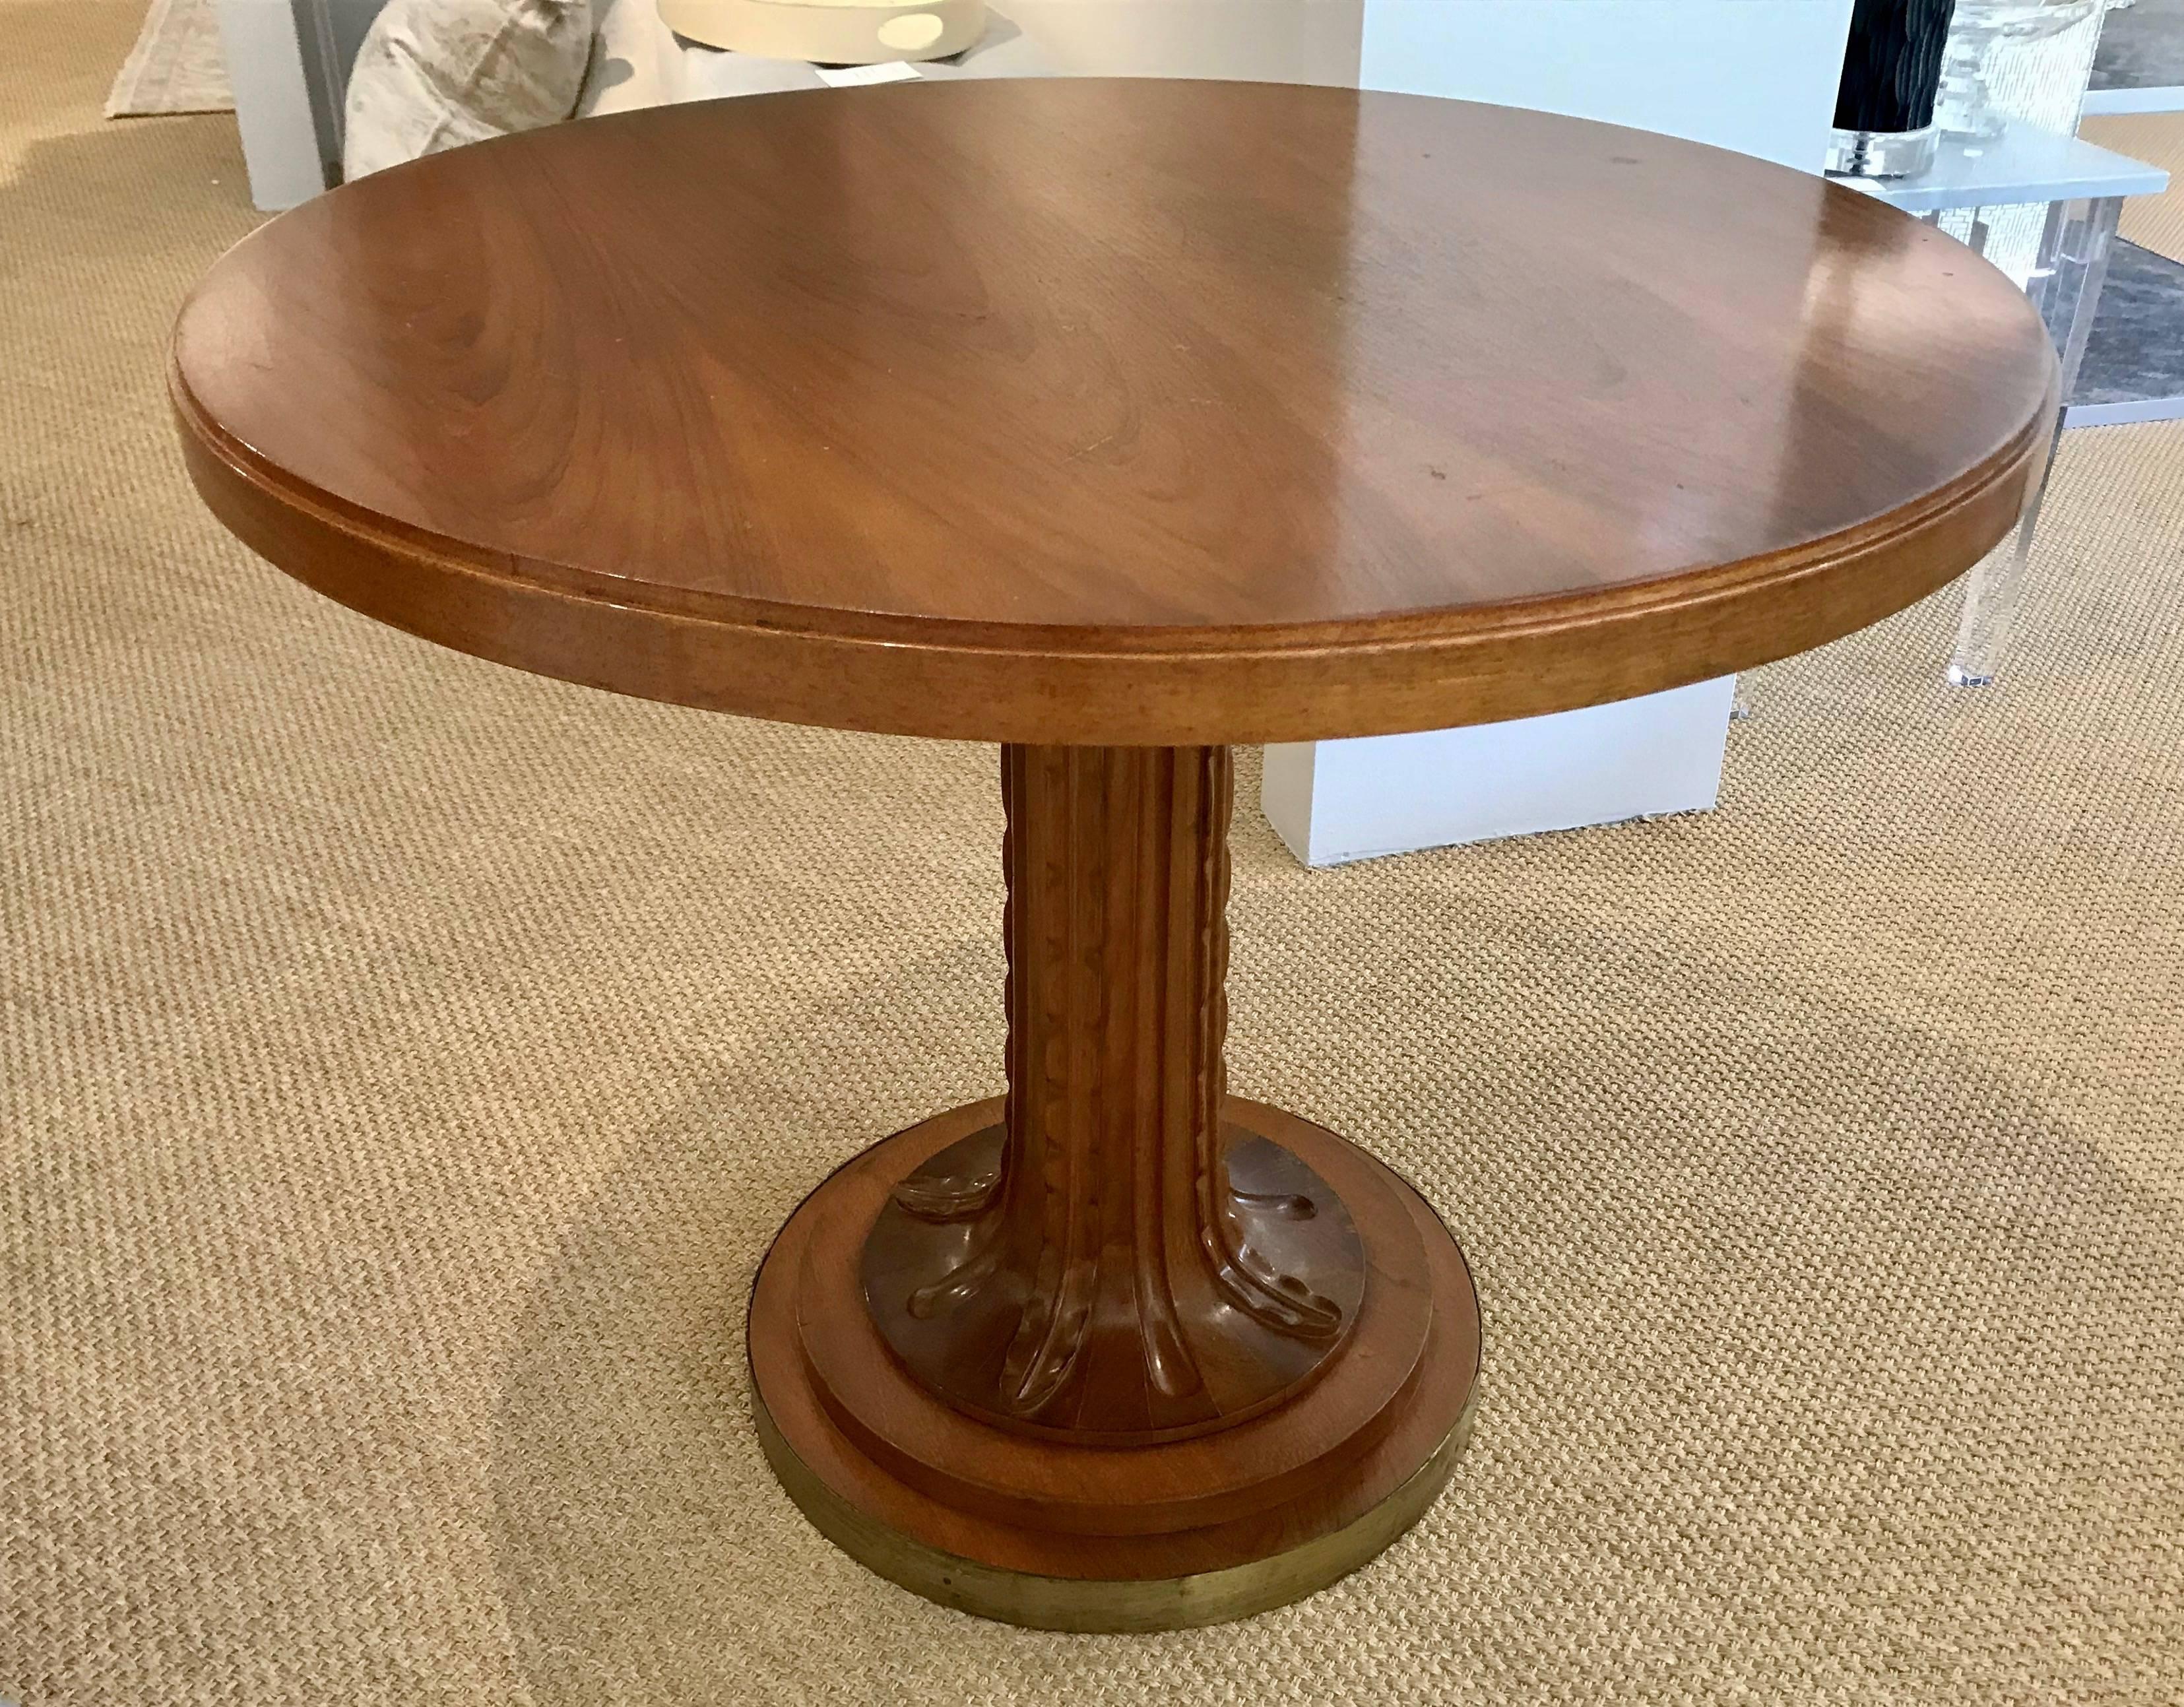 Round centre or hall table designed by T. H. Robsjohn-Gibbings for Saridis of Athens. Constructed of Greek walnut, this pedestal table returns to the ancient Grecian furniture designs of Gibbings most important commission, Casa Encantada. Stylized